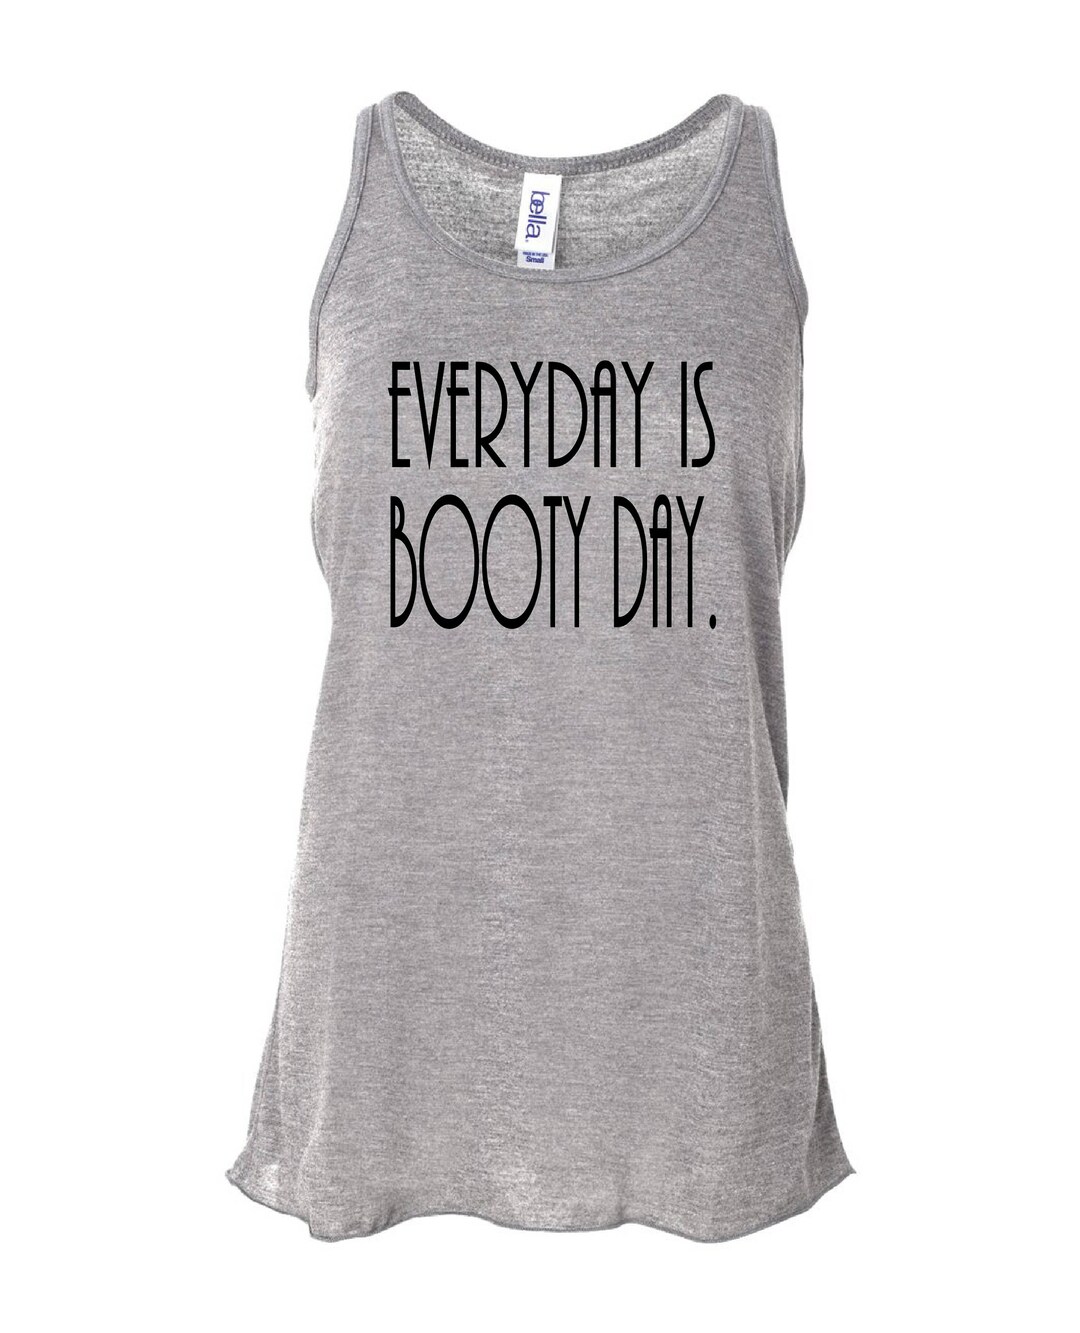 Everyday is Booty Day. Flowy Tank Woman's Tank Running - Etsy